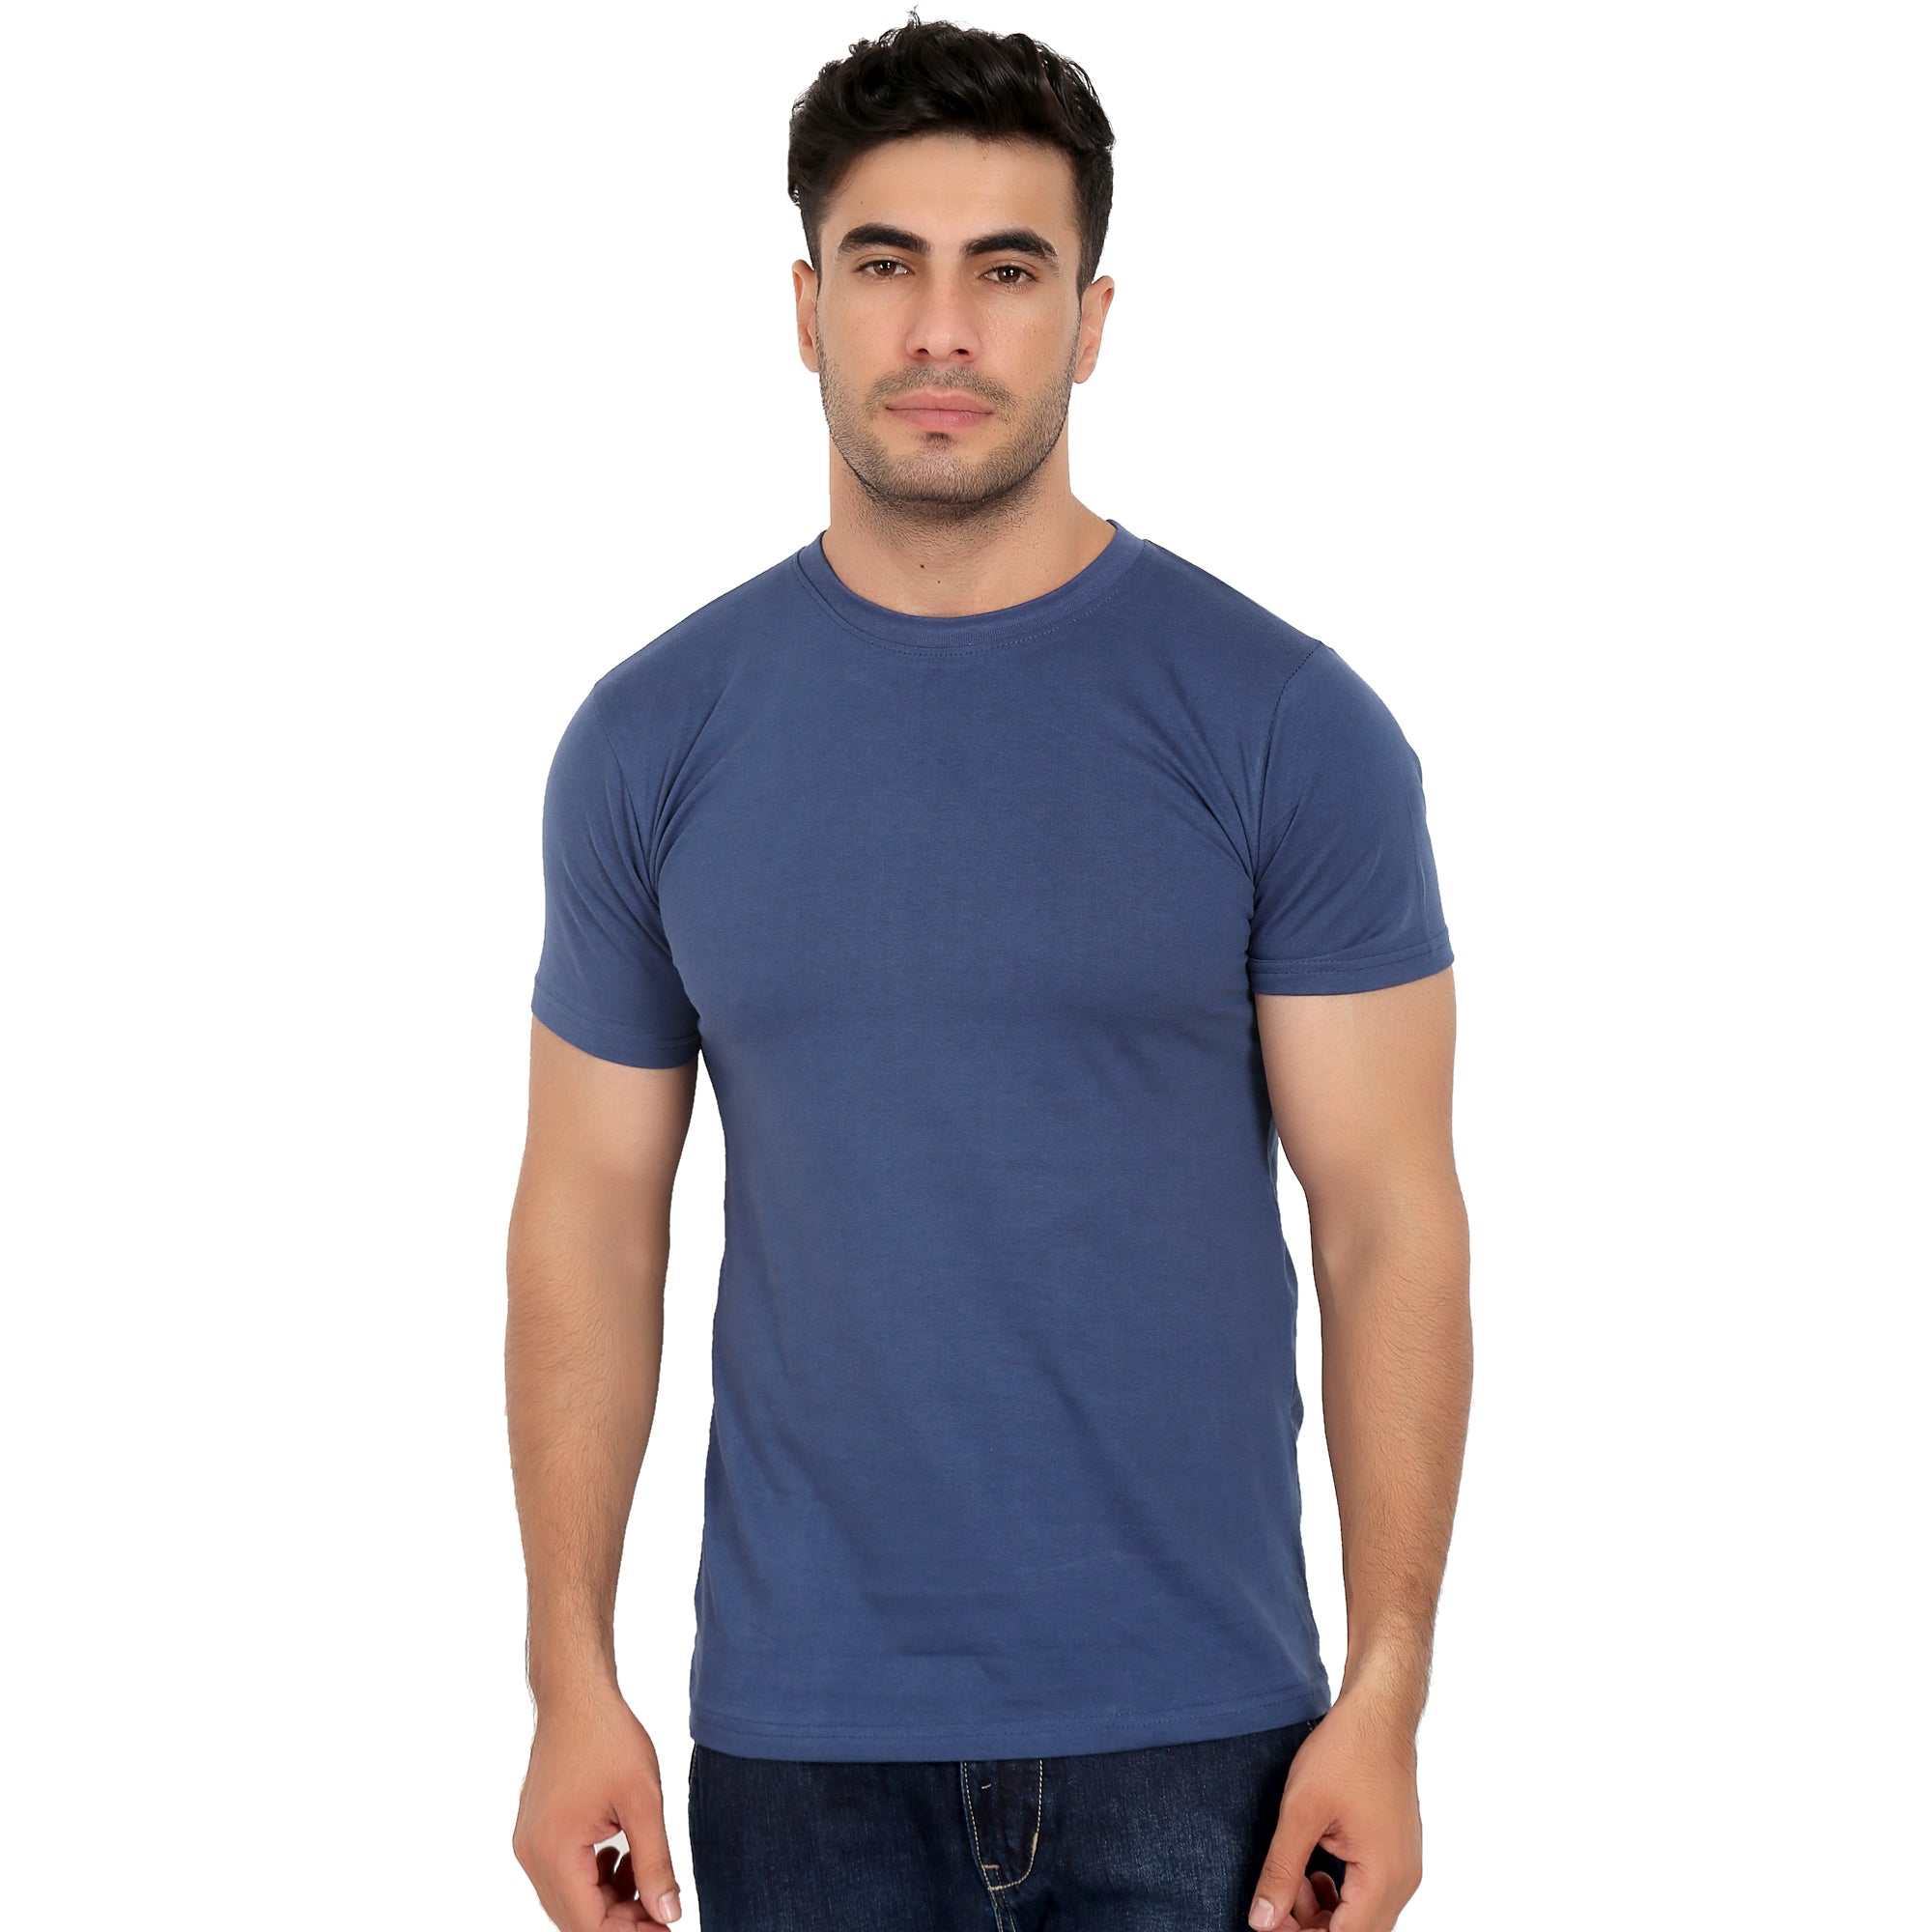 Combo Offer - Men Crew Neck Cotton T-Shirts - Half Sleeves - 3 Colors - Olive Green, Blue & White